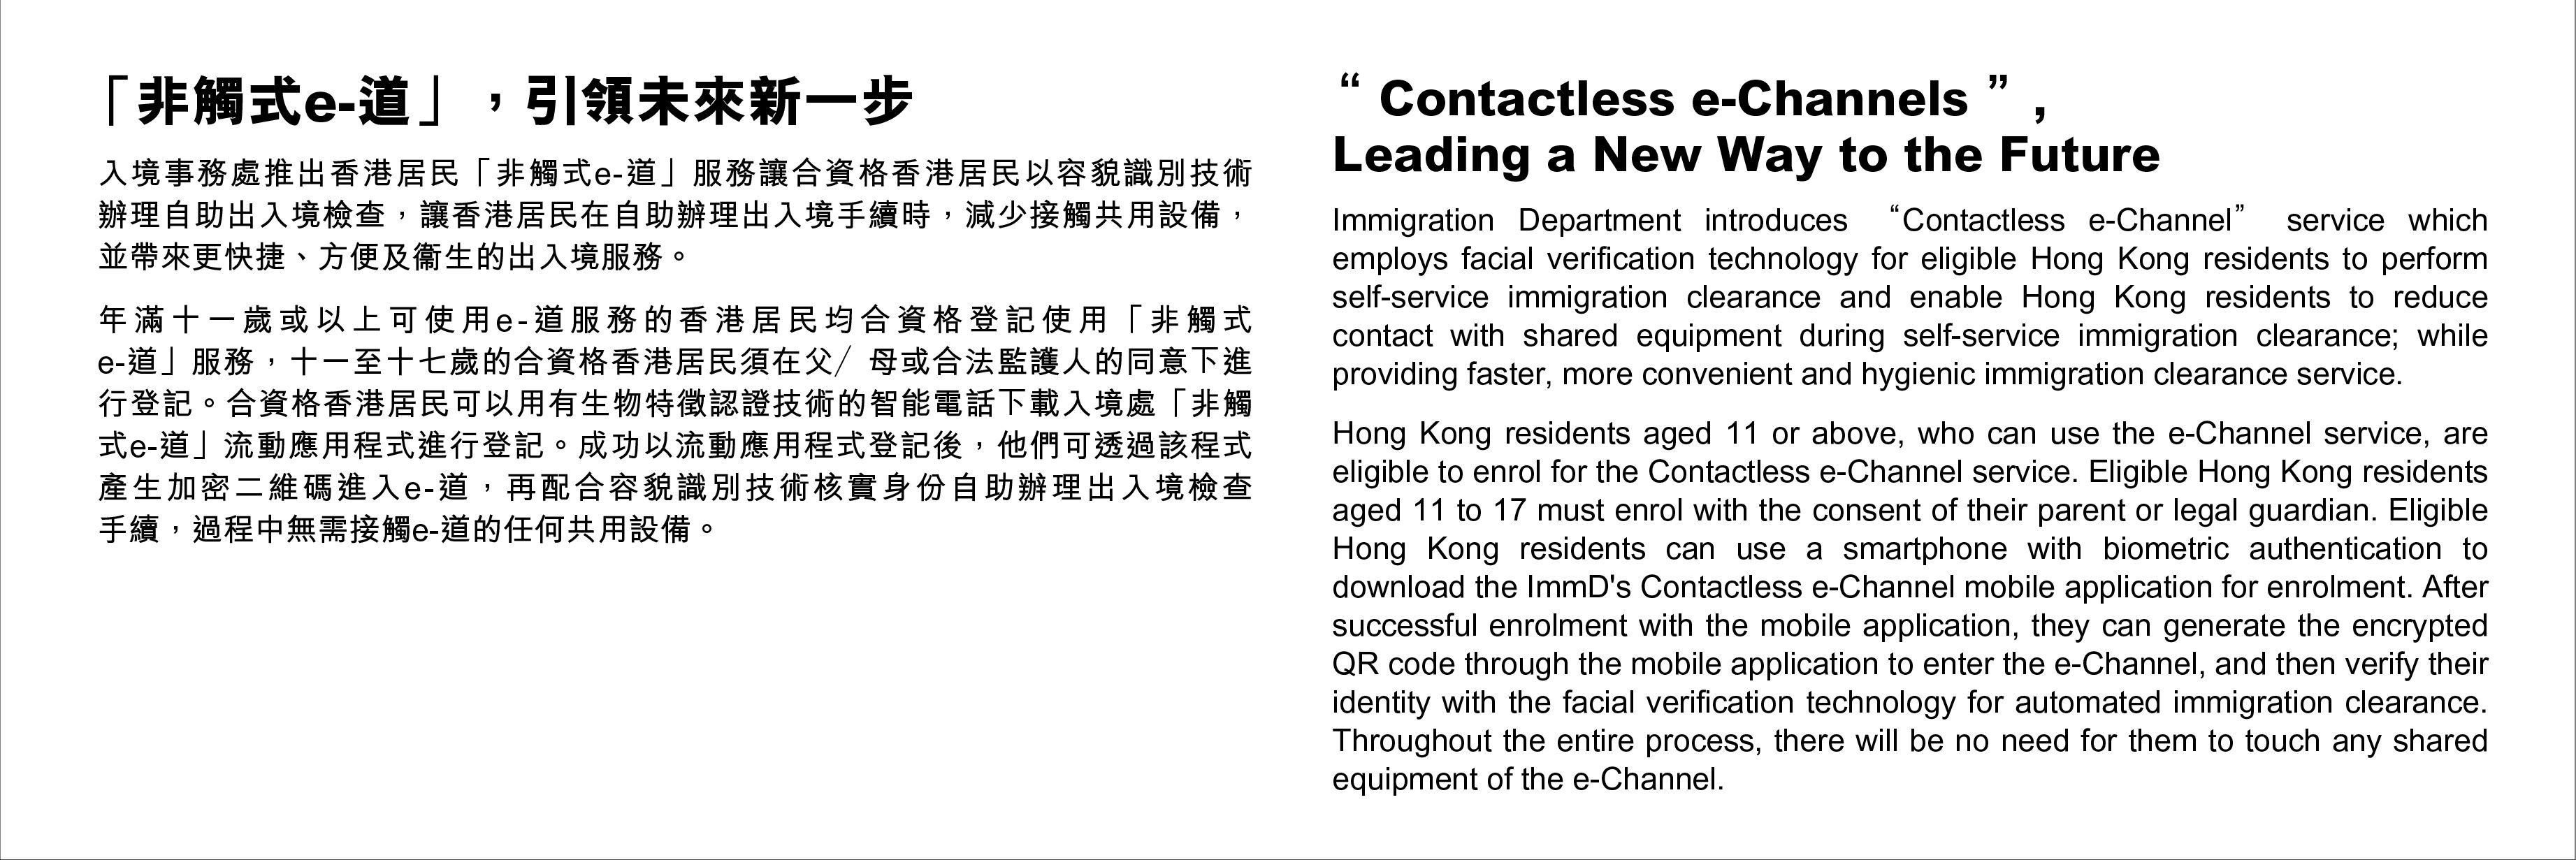 “Contactless e-Channels”, Leading a New Way to the Future - Immigration Department introduces “Contactless e-Channel” service whichemploys facial verification technology for eligible Hong Kong residents to perform self-service immigration clearance and enable Hong Kong residents to reducecontact with shared equipment during self-service immigration clearance; whileproviding faster, more convenient and hygienic immigration clearance service. Hong Kong residents aged 11 or above, who can use the e-Channel service, areeligible to enrol for the Contactless e-Channel service. Eligible Hong Kong residents aged 11 to 17 must enrol with the consent of their parent or legal guardian. Eligible Hong Kong residents can use a smartphone with biometric authentication todownload the ImmD's Contactless e-Channel mobile application for enrolment. After successful enrolment with the mobile application, they can generate the encrypted QR code through the mobile application to enter the e-Channel, and then verify their identity with the facial verification technology for automated immigration clearance. Throughout the entire process, there will be no need for them to touch any shared equipment of the e-Channel.